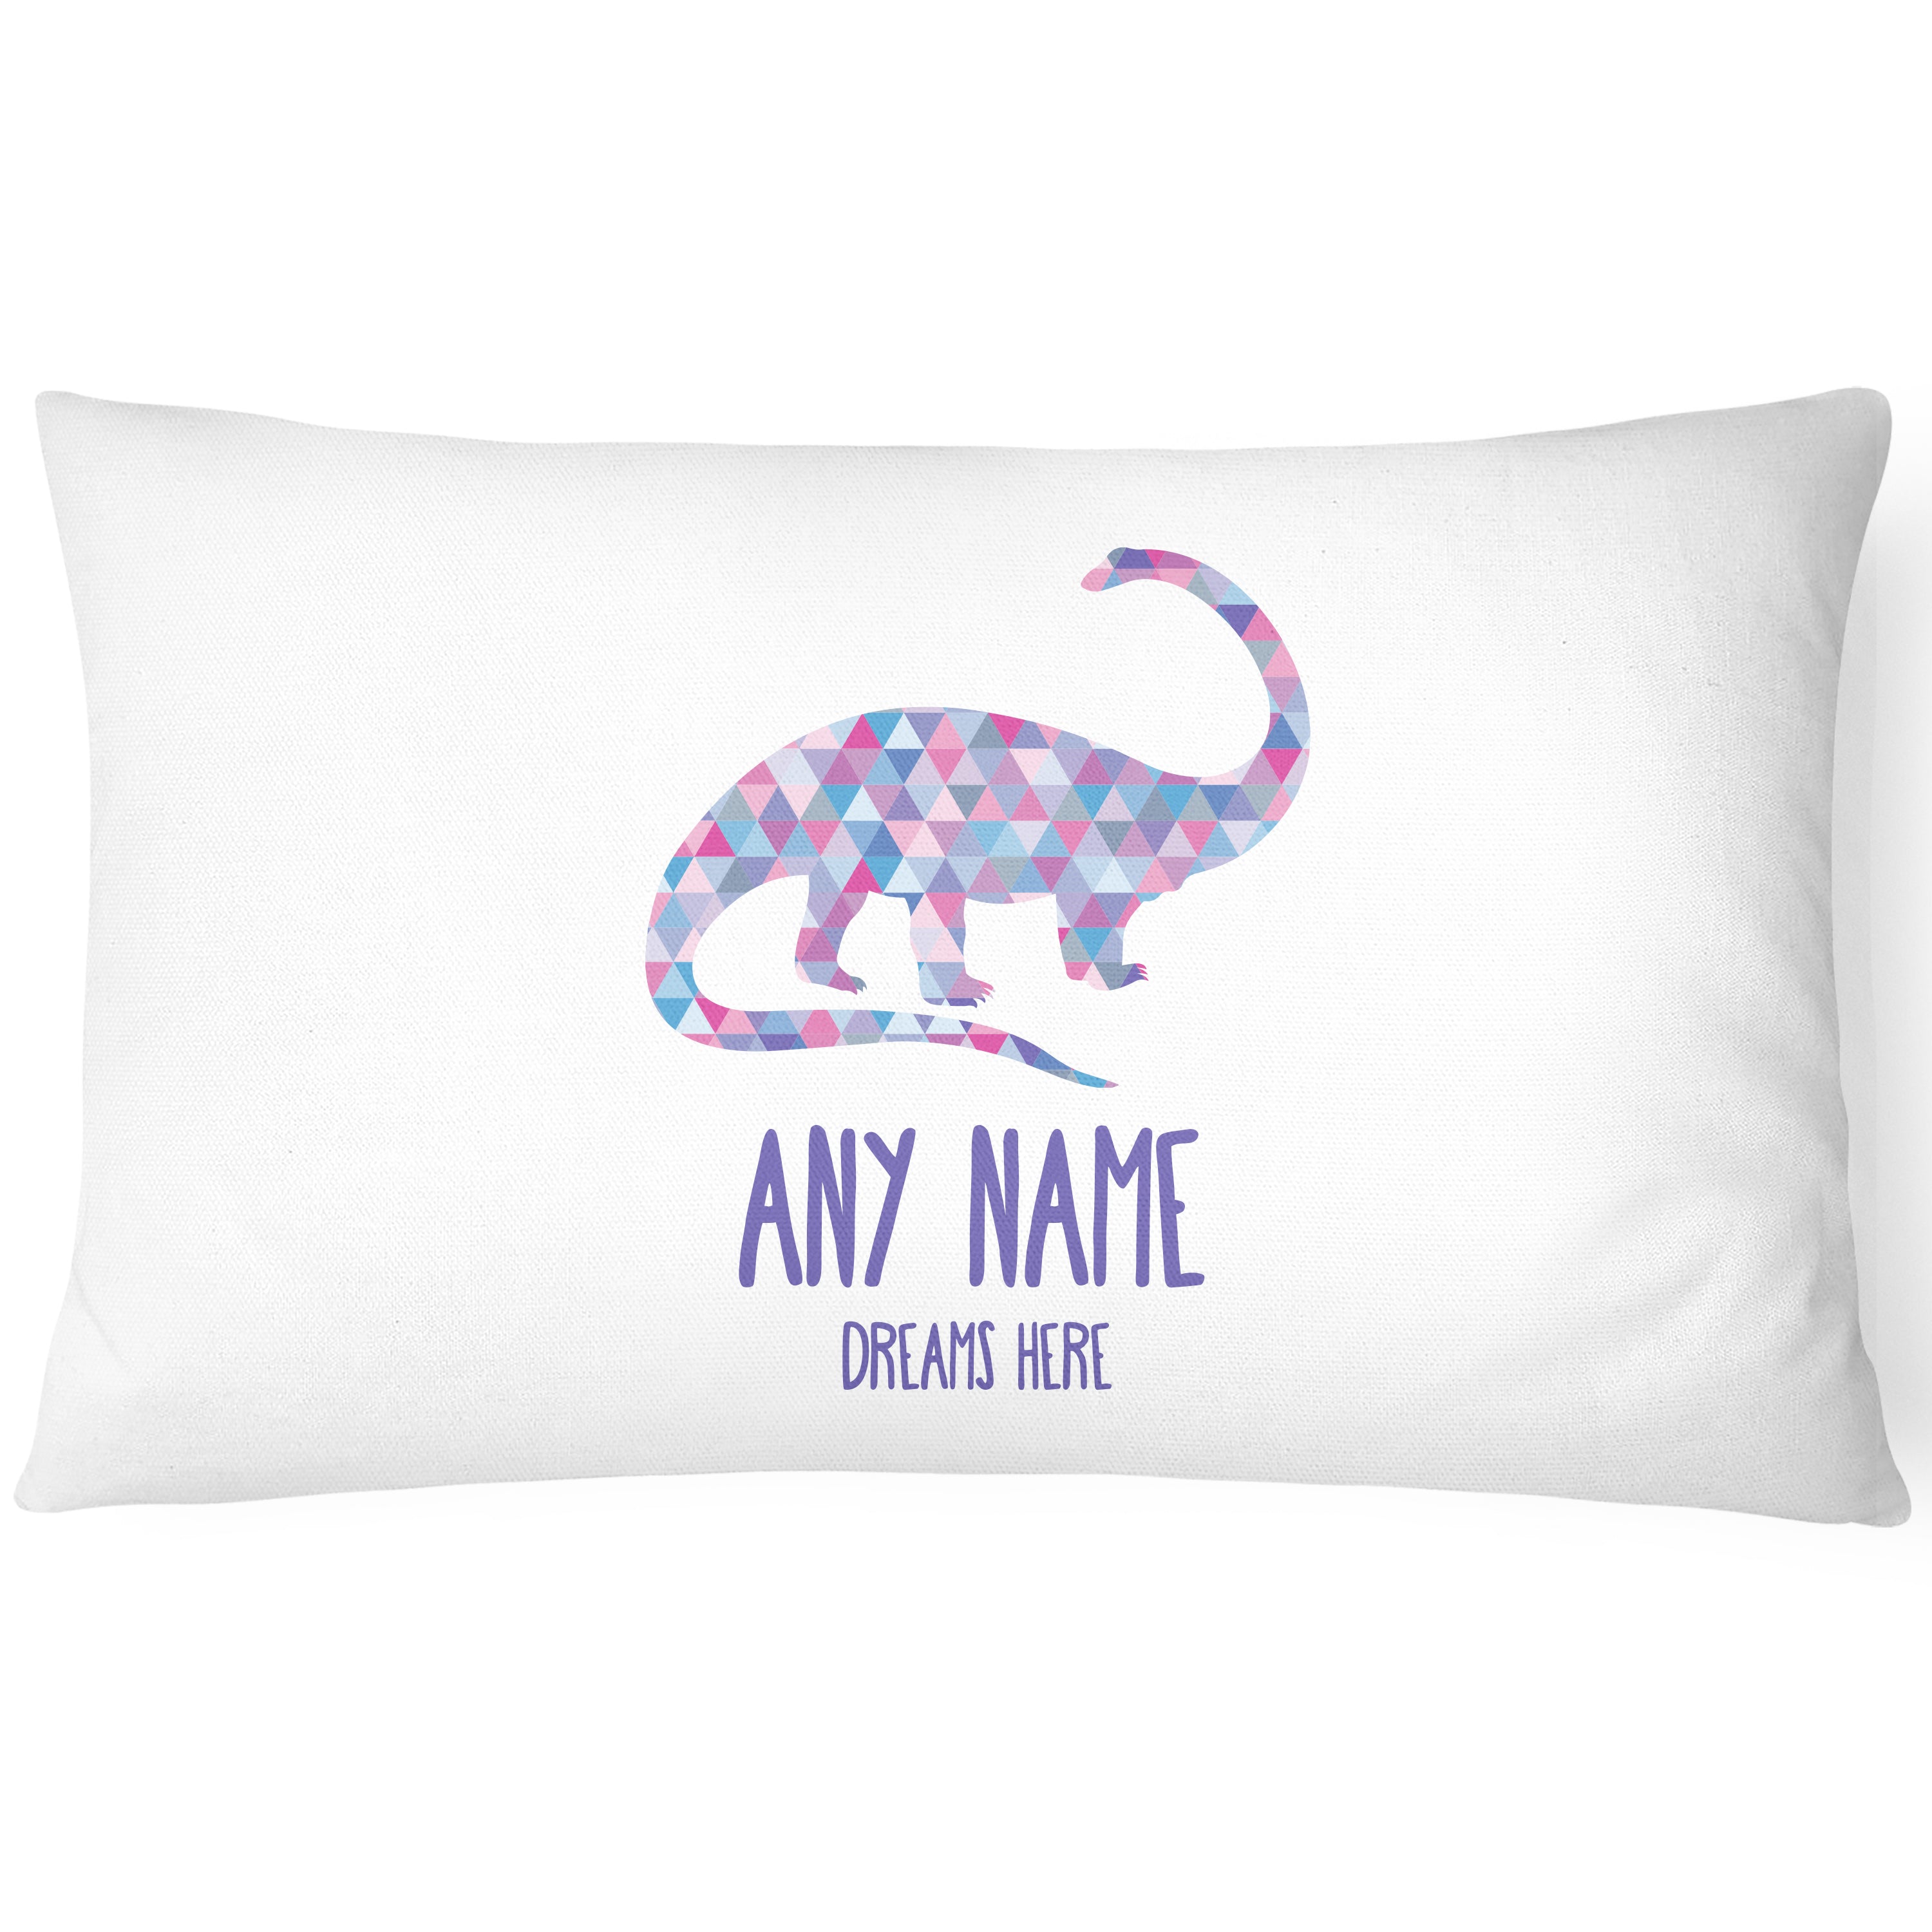 Dinosaur Children's Pillowcase - Personalise with Any Name